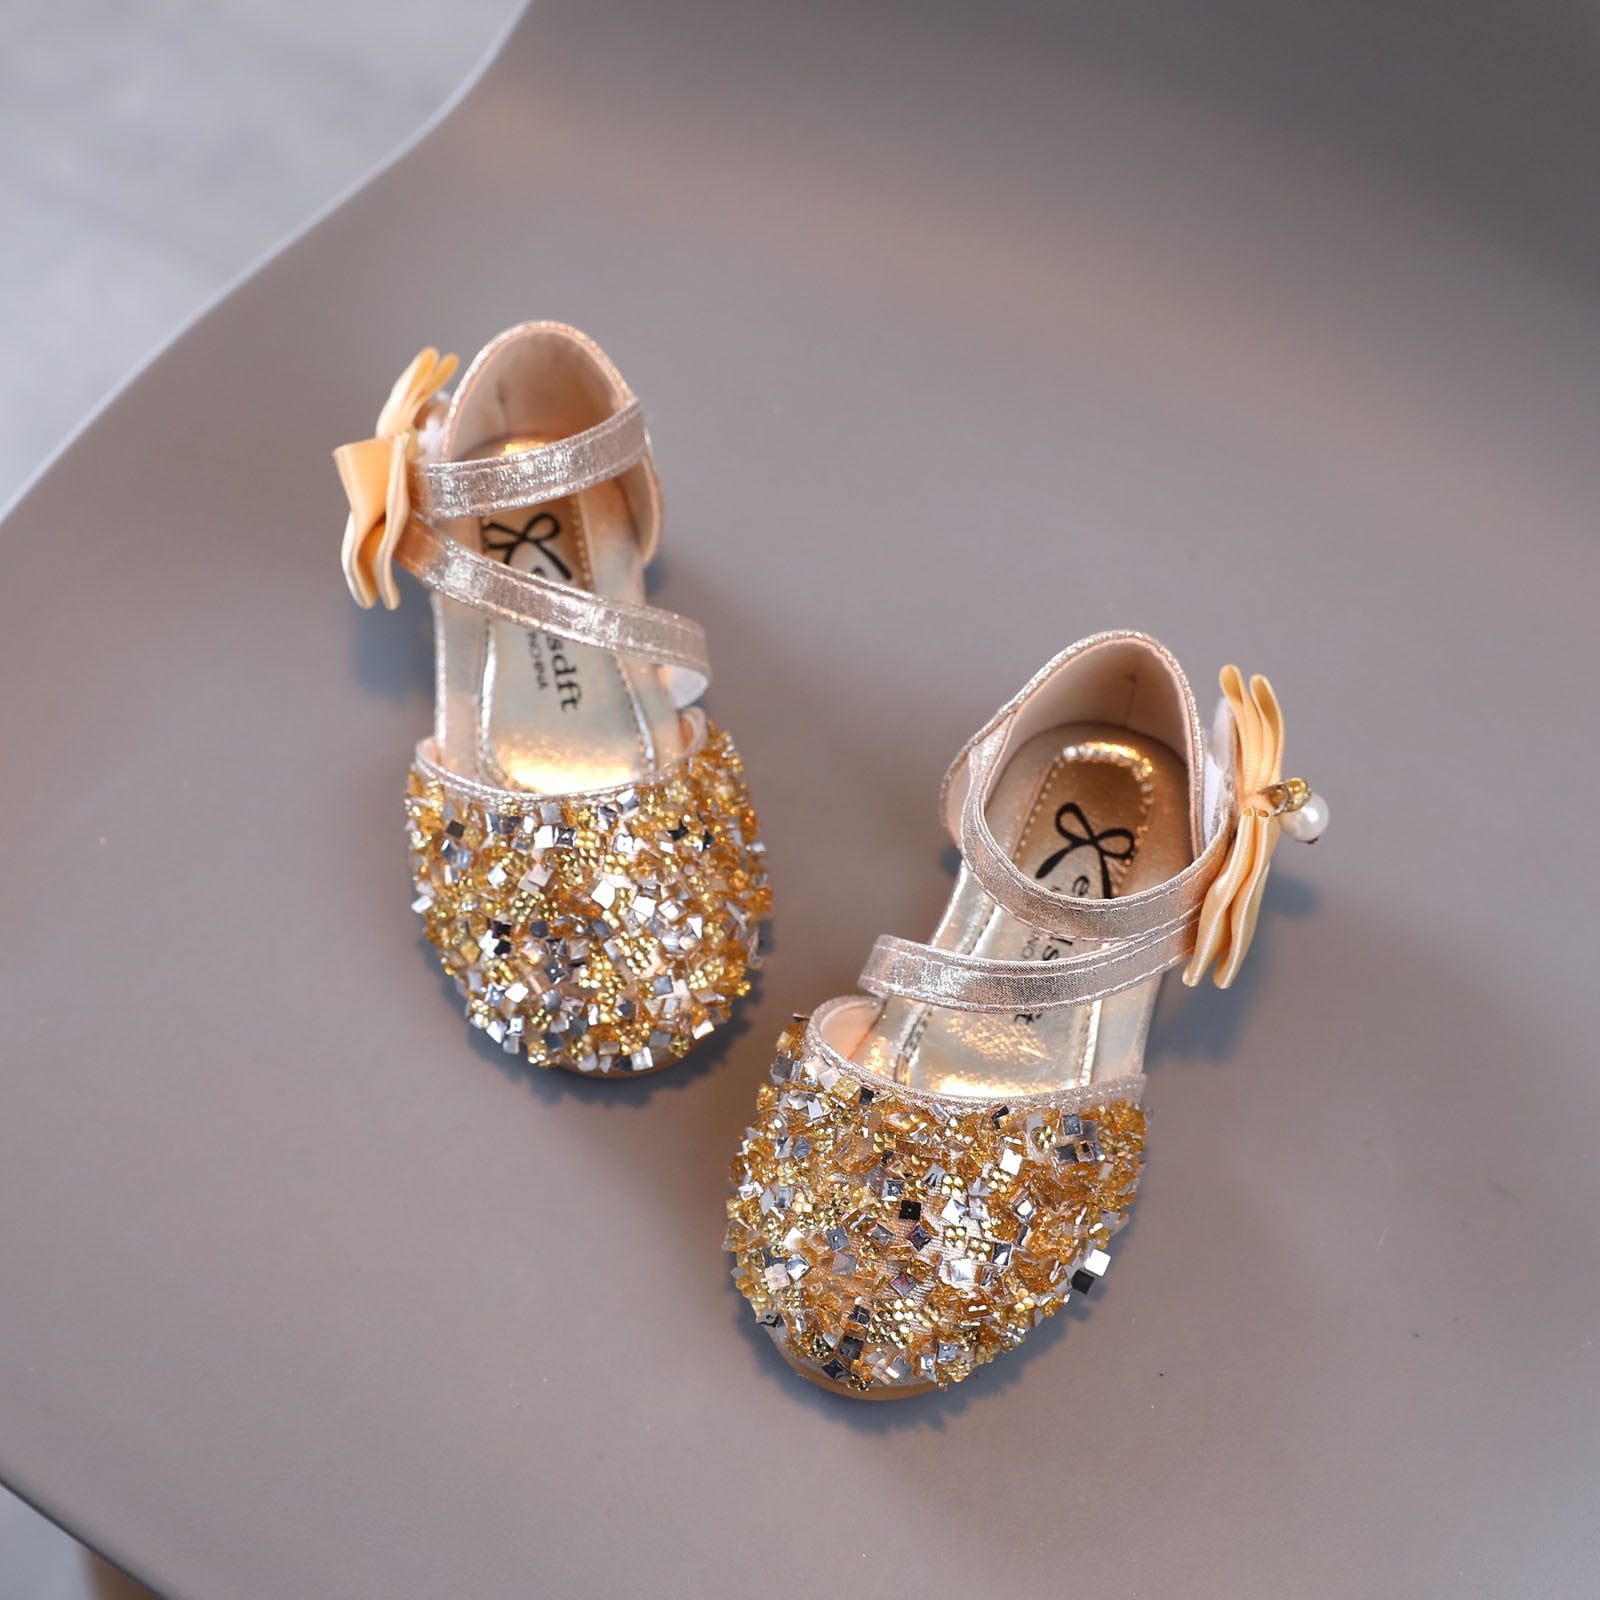 Clearance Toddler Girls Summer Sandals Toddler Shoes Baby Girls Cute  Fashion Pearl Bow Sequins Non-slip Small Leather Princess Shoes,Gold Sandals  For Kids Size 15-18 Months - Walmart.com